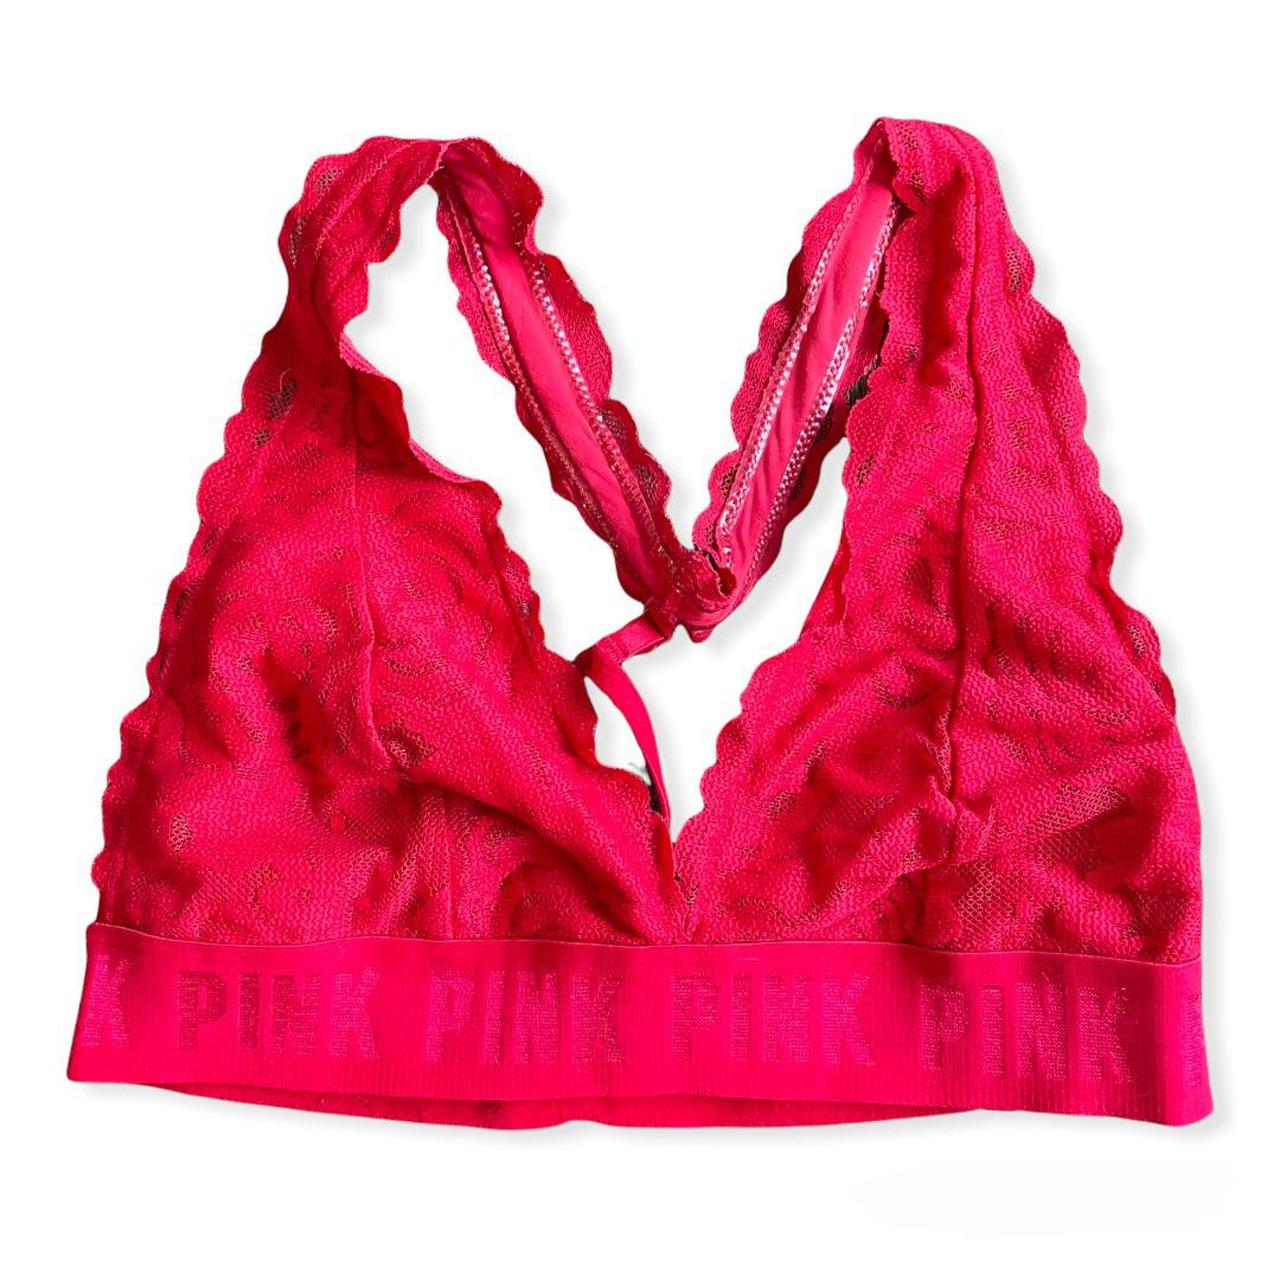 Vibrant red lace bralette from PINK / Victoria's - Depop